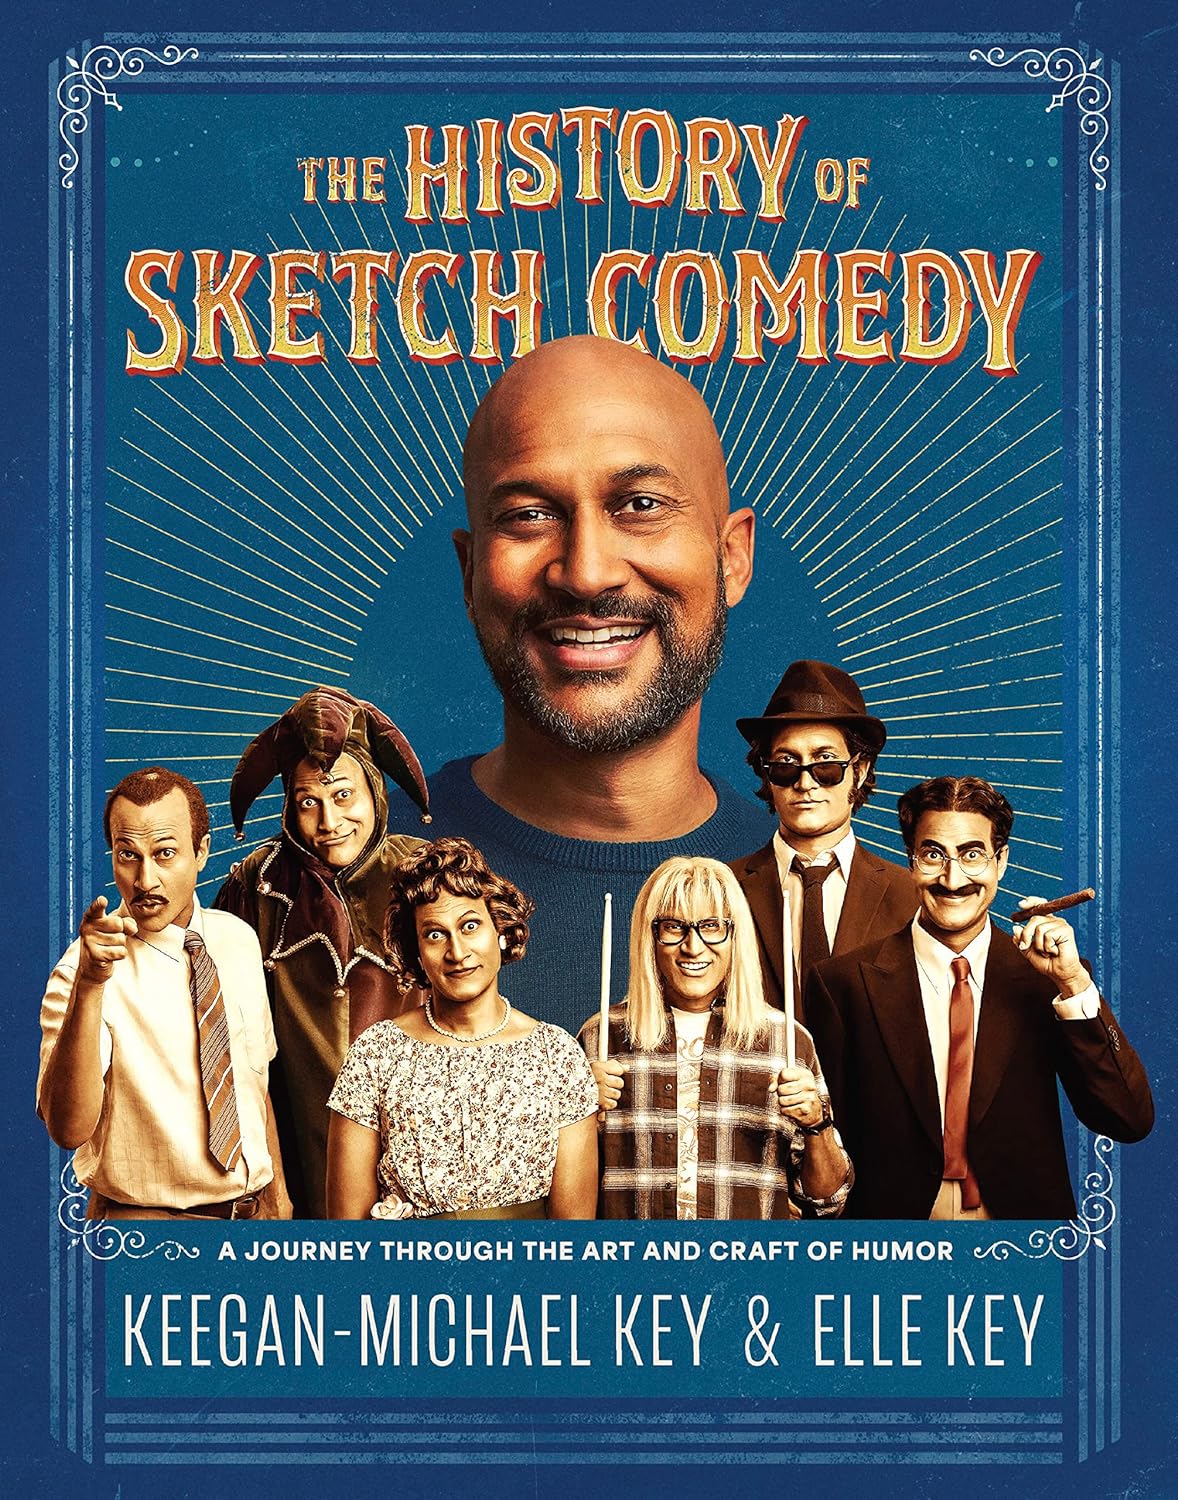 The History of Sketch Comedy // A Journey Through the Art and Craft of Humor